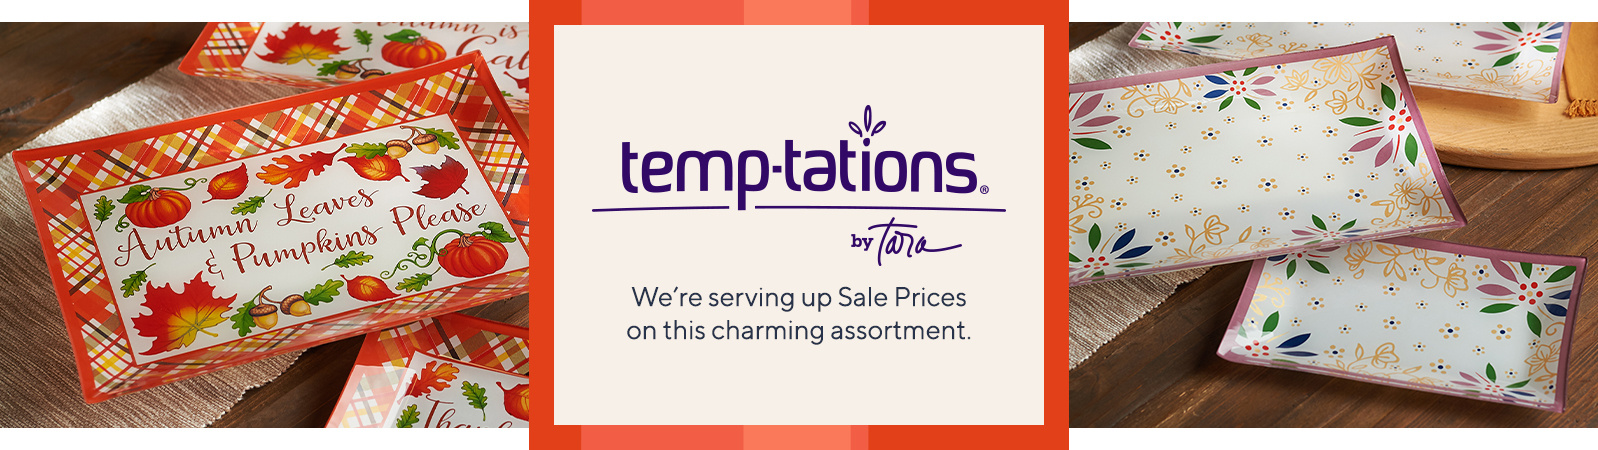 Temp-tations by Tara   We're serving up Sale Prices on this charming assortment